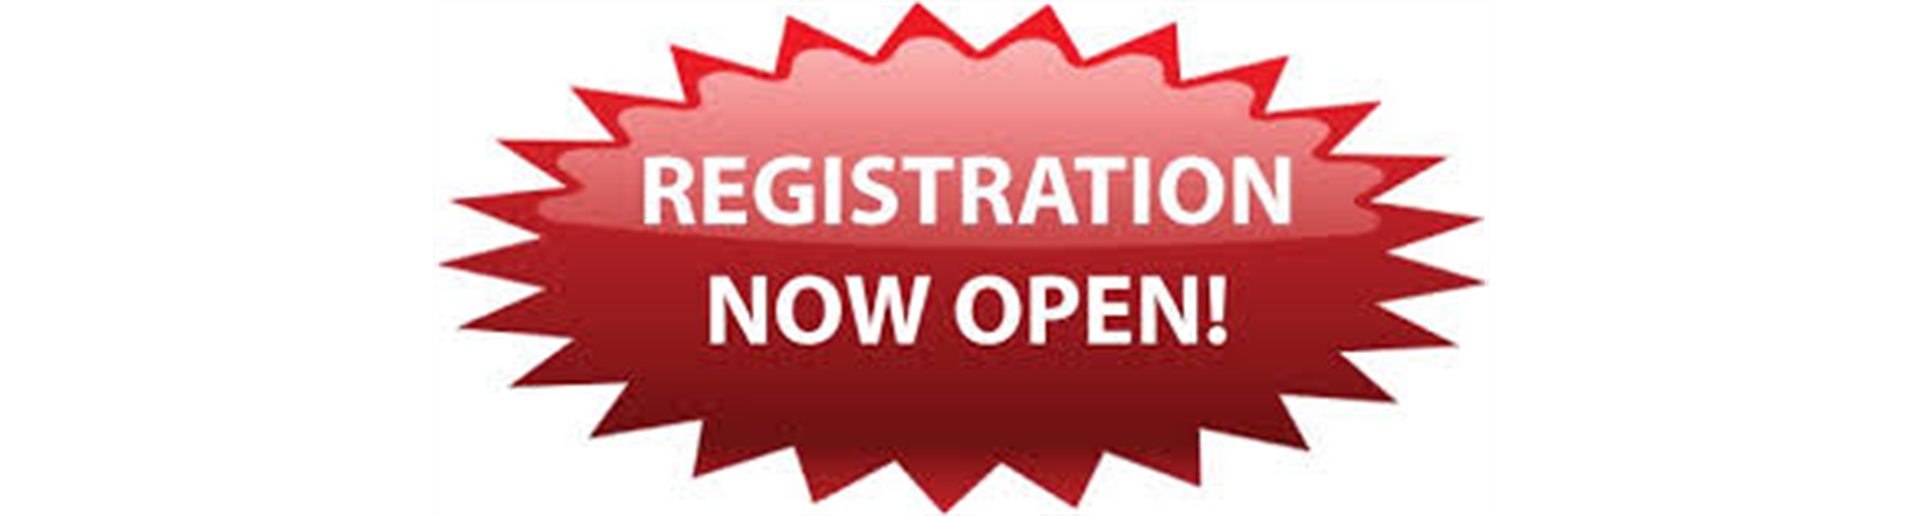 Spring Sports Registration Now Open